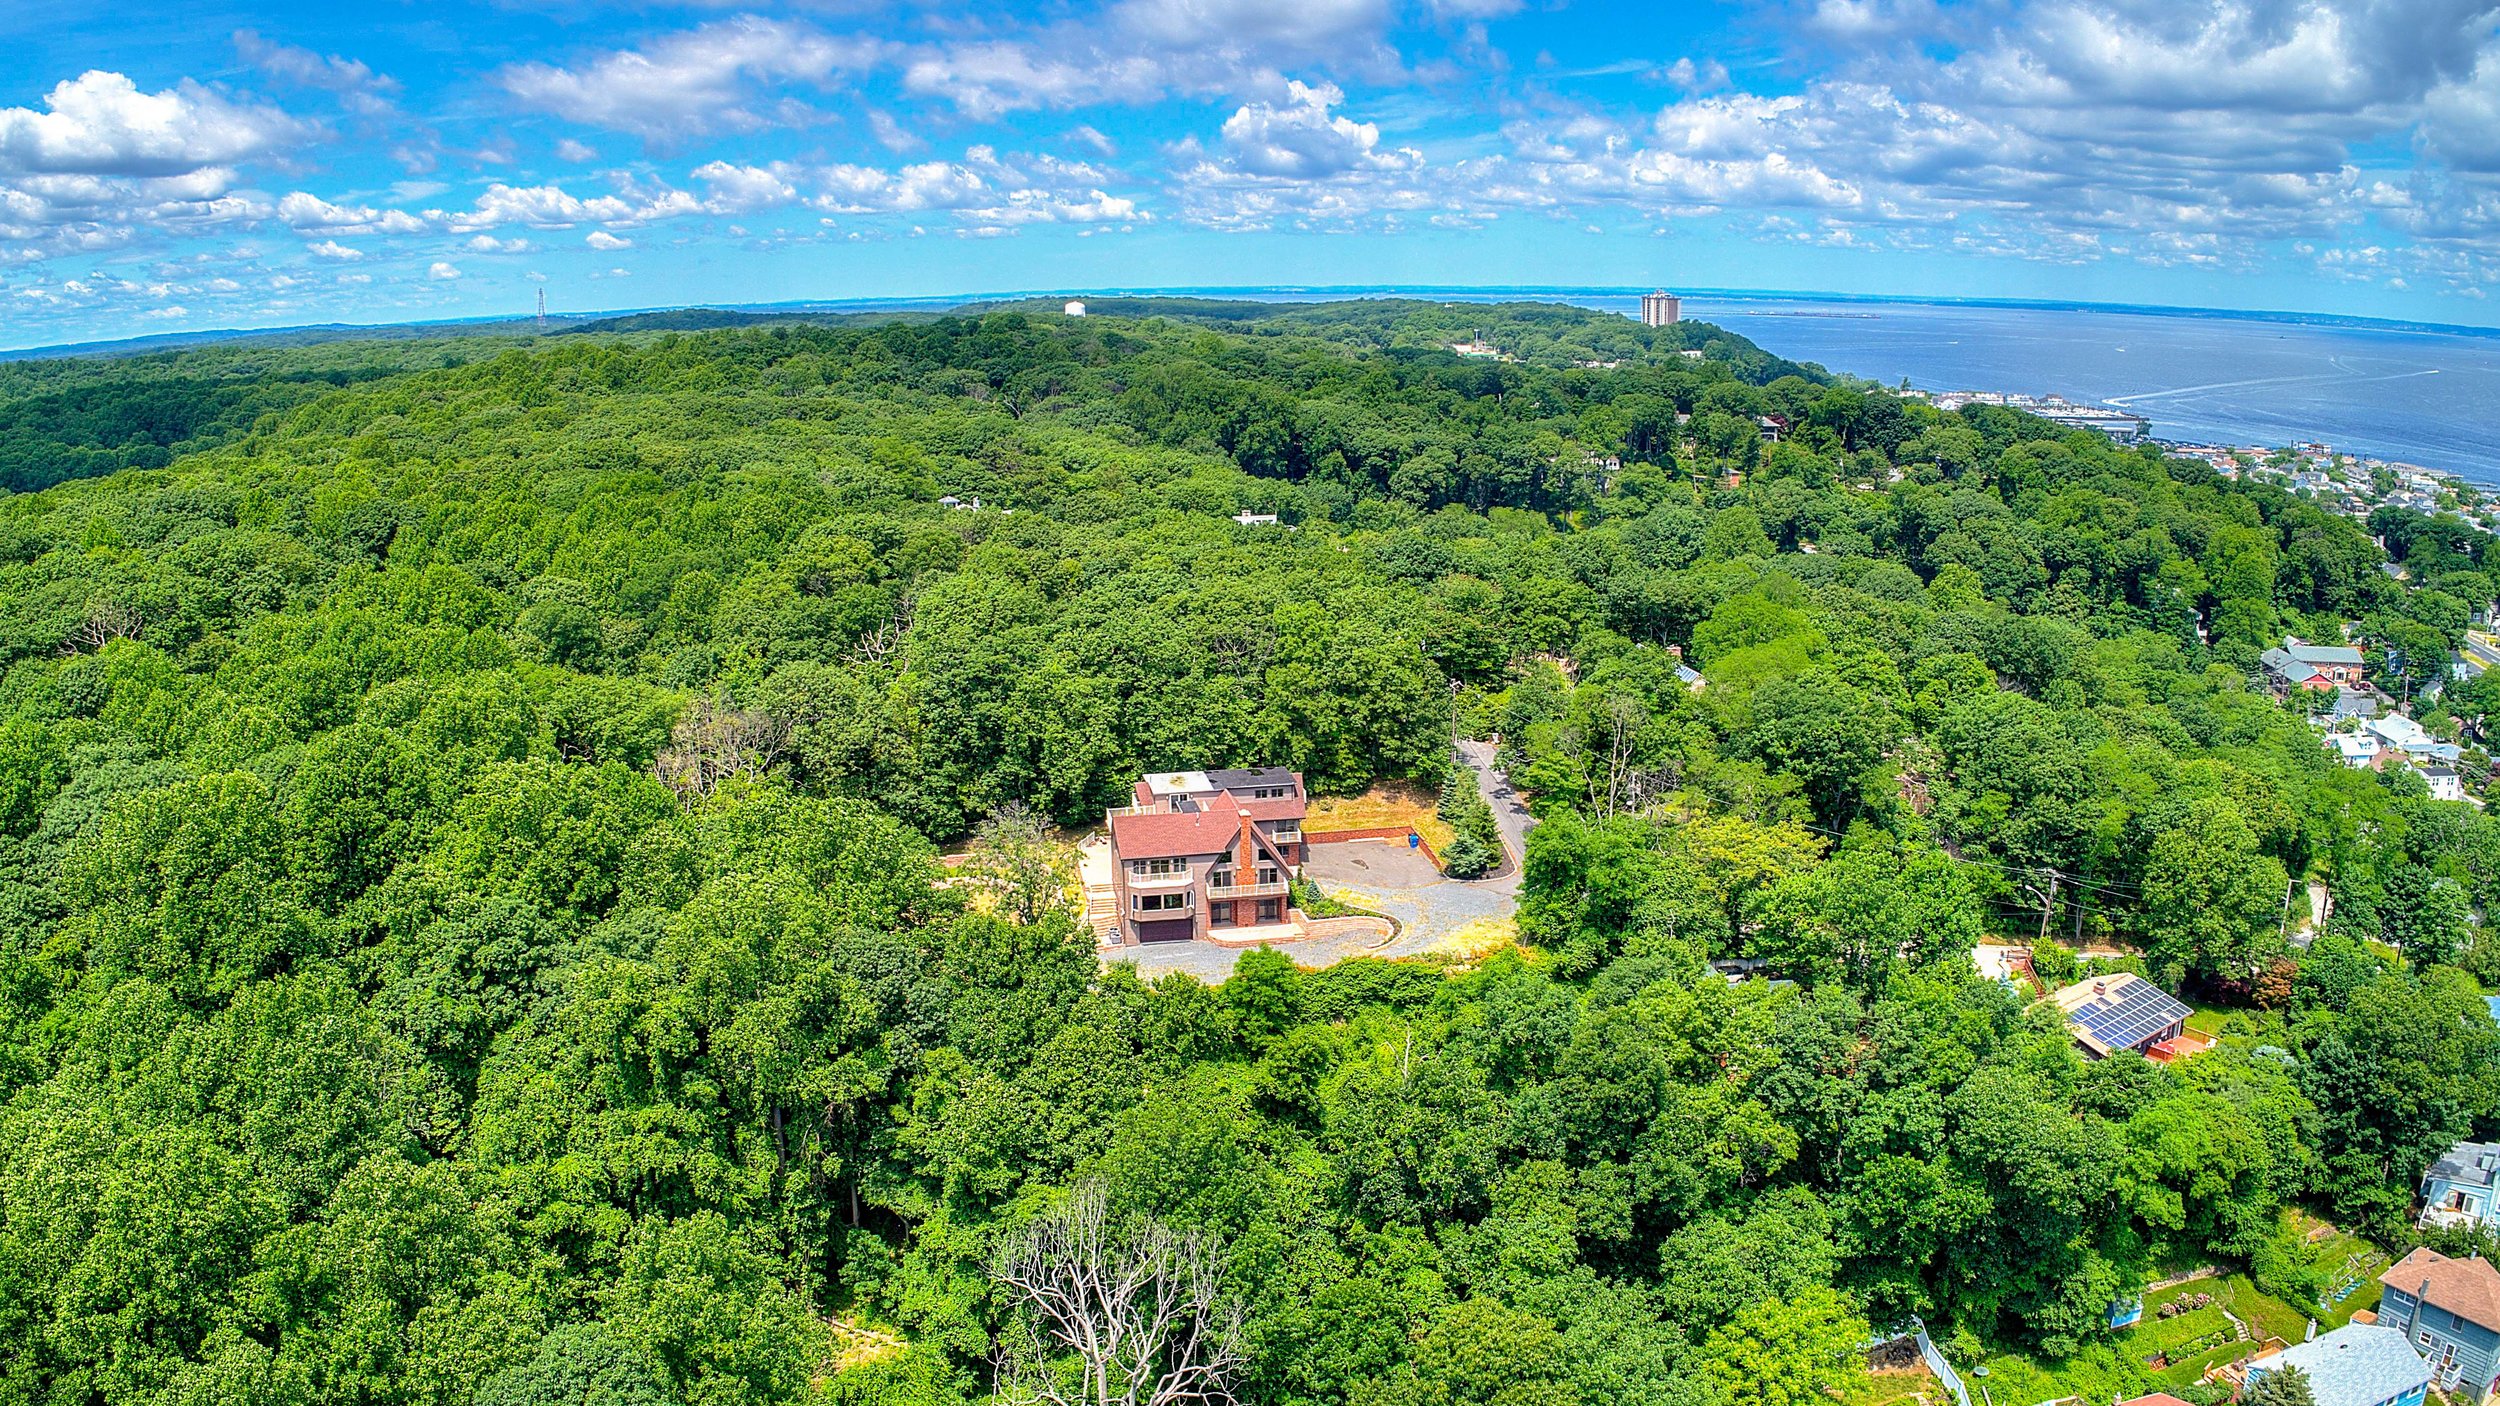 Aerial of House on top a mountain overlooking the ocean in Highlands New Jersey Drone Photography